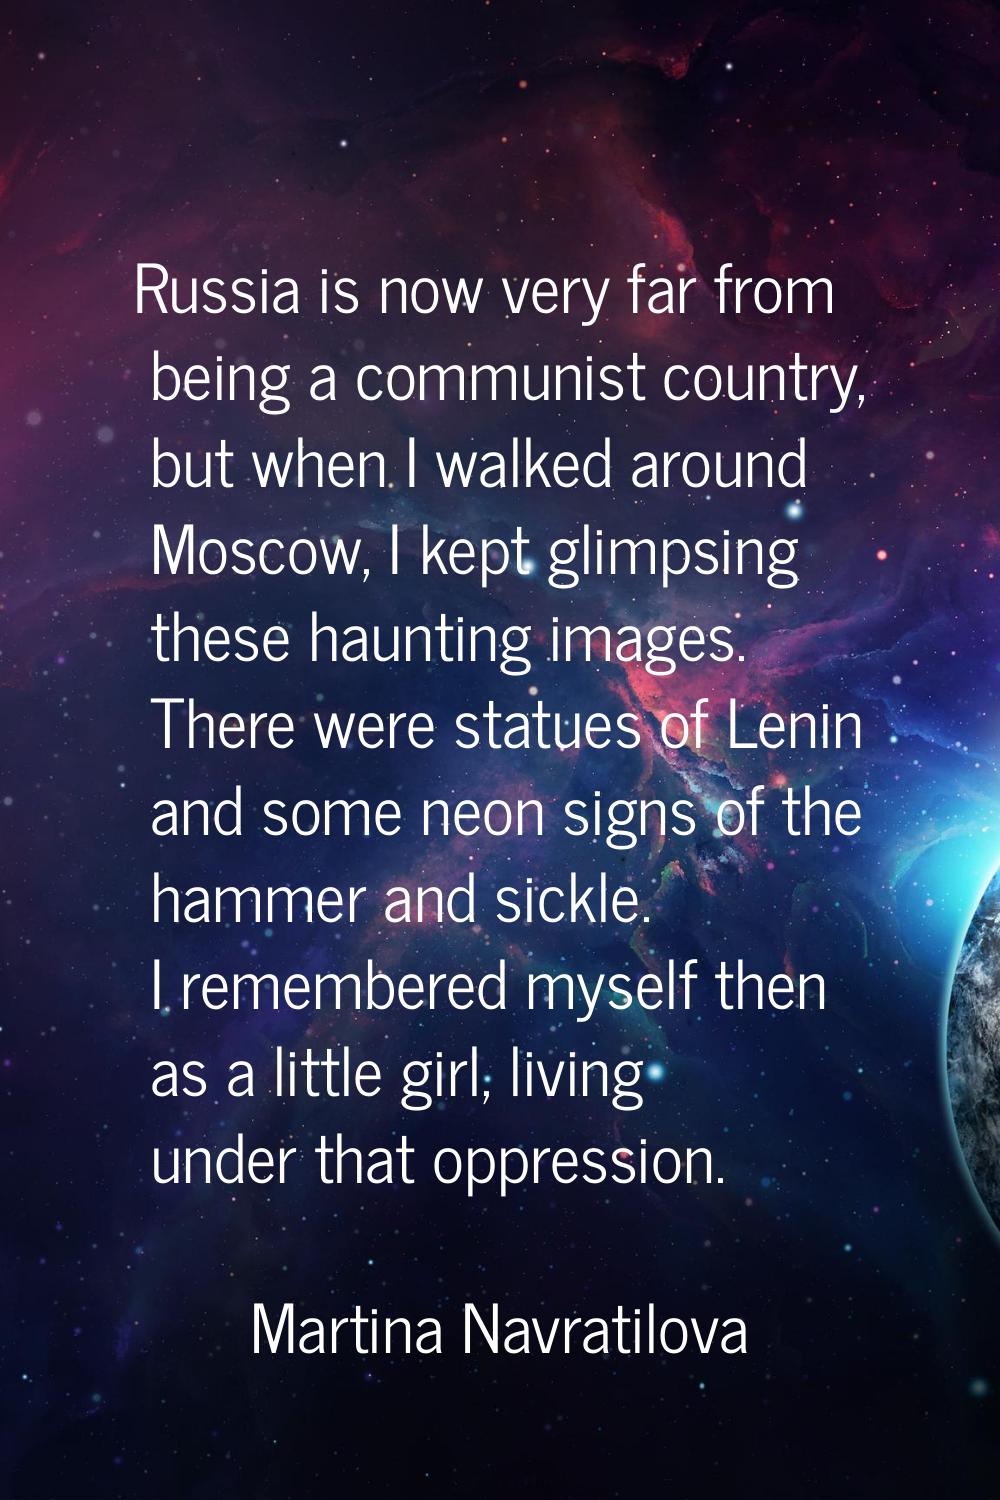 Russia is now very far from being a communist country, but when I walked around Moscow, I kept glim